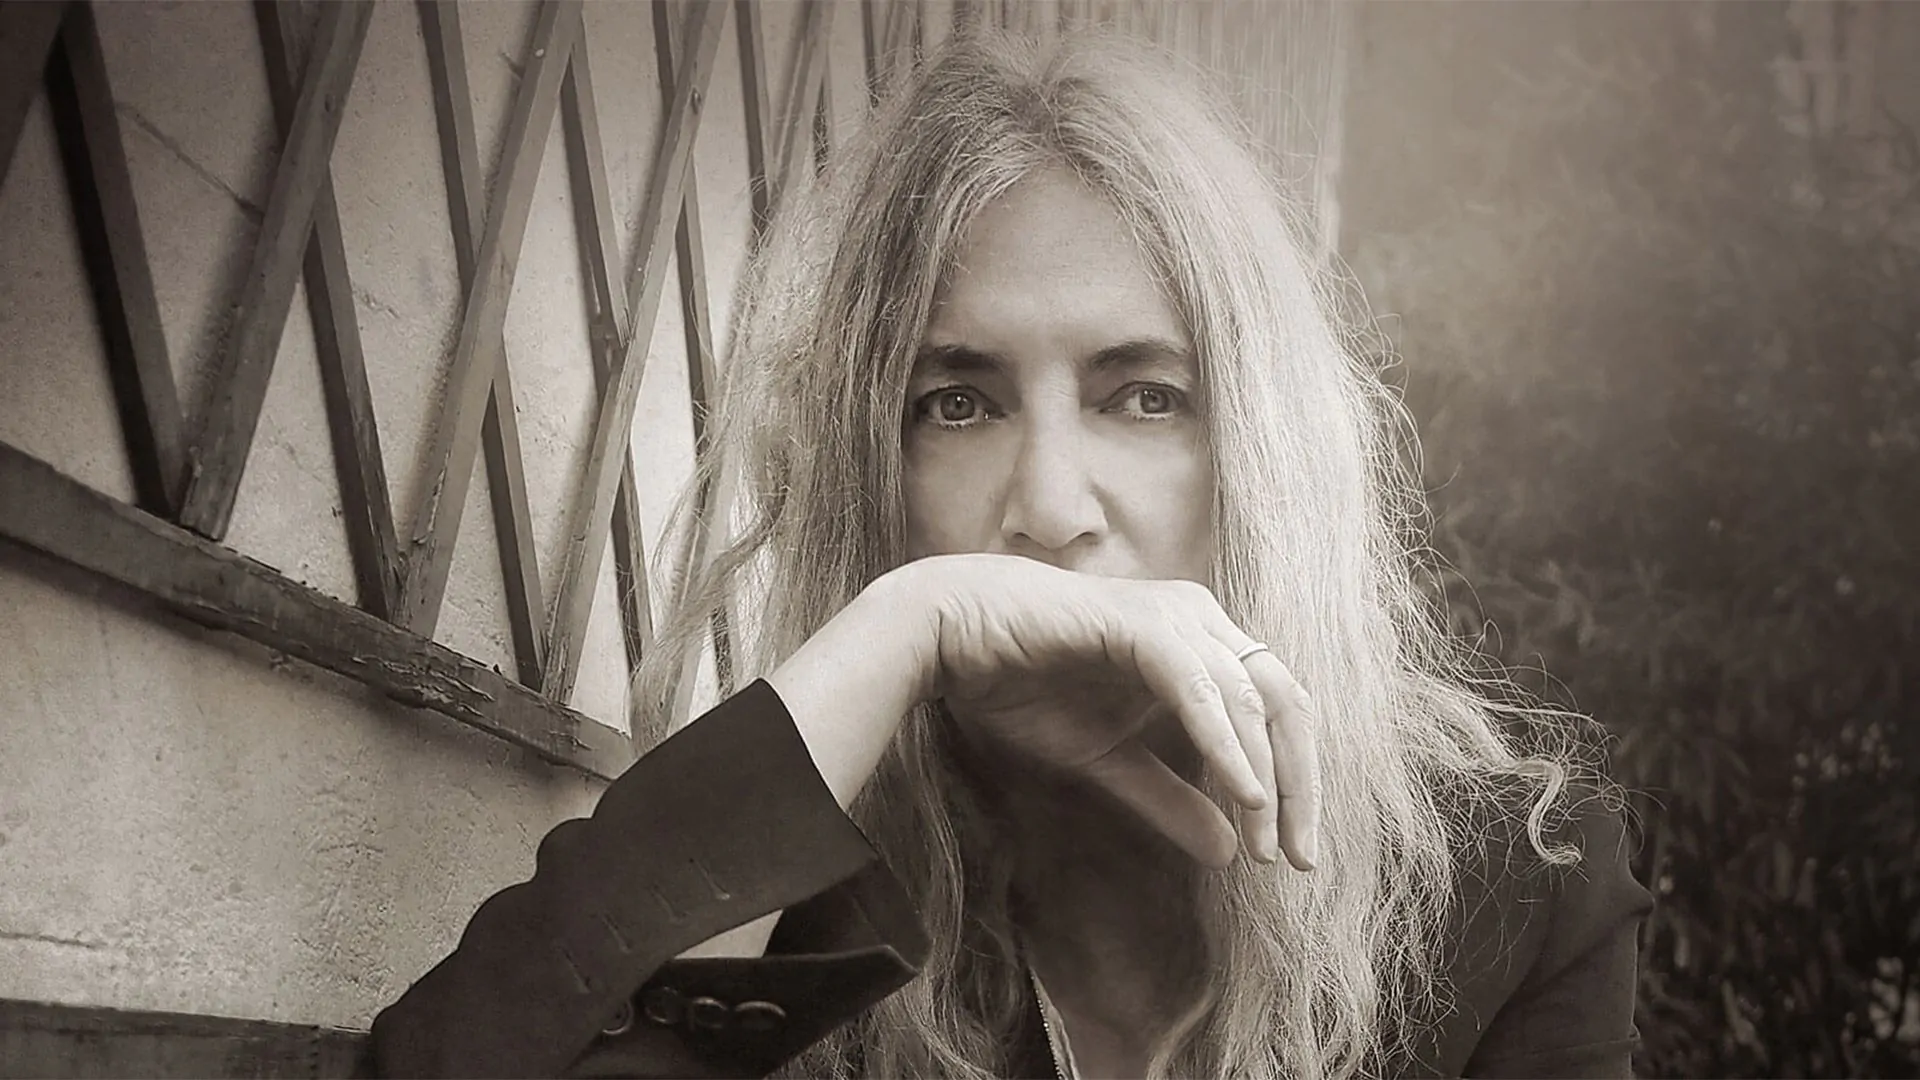 The legendary PATTI SMITH has announced two shows at London Royal Albert Hall in November